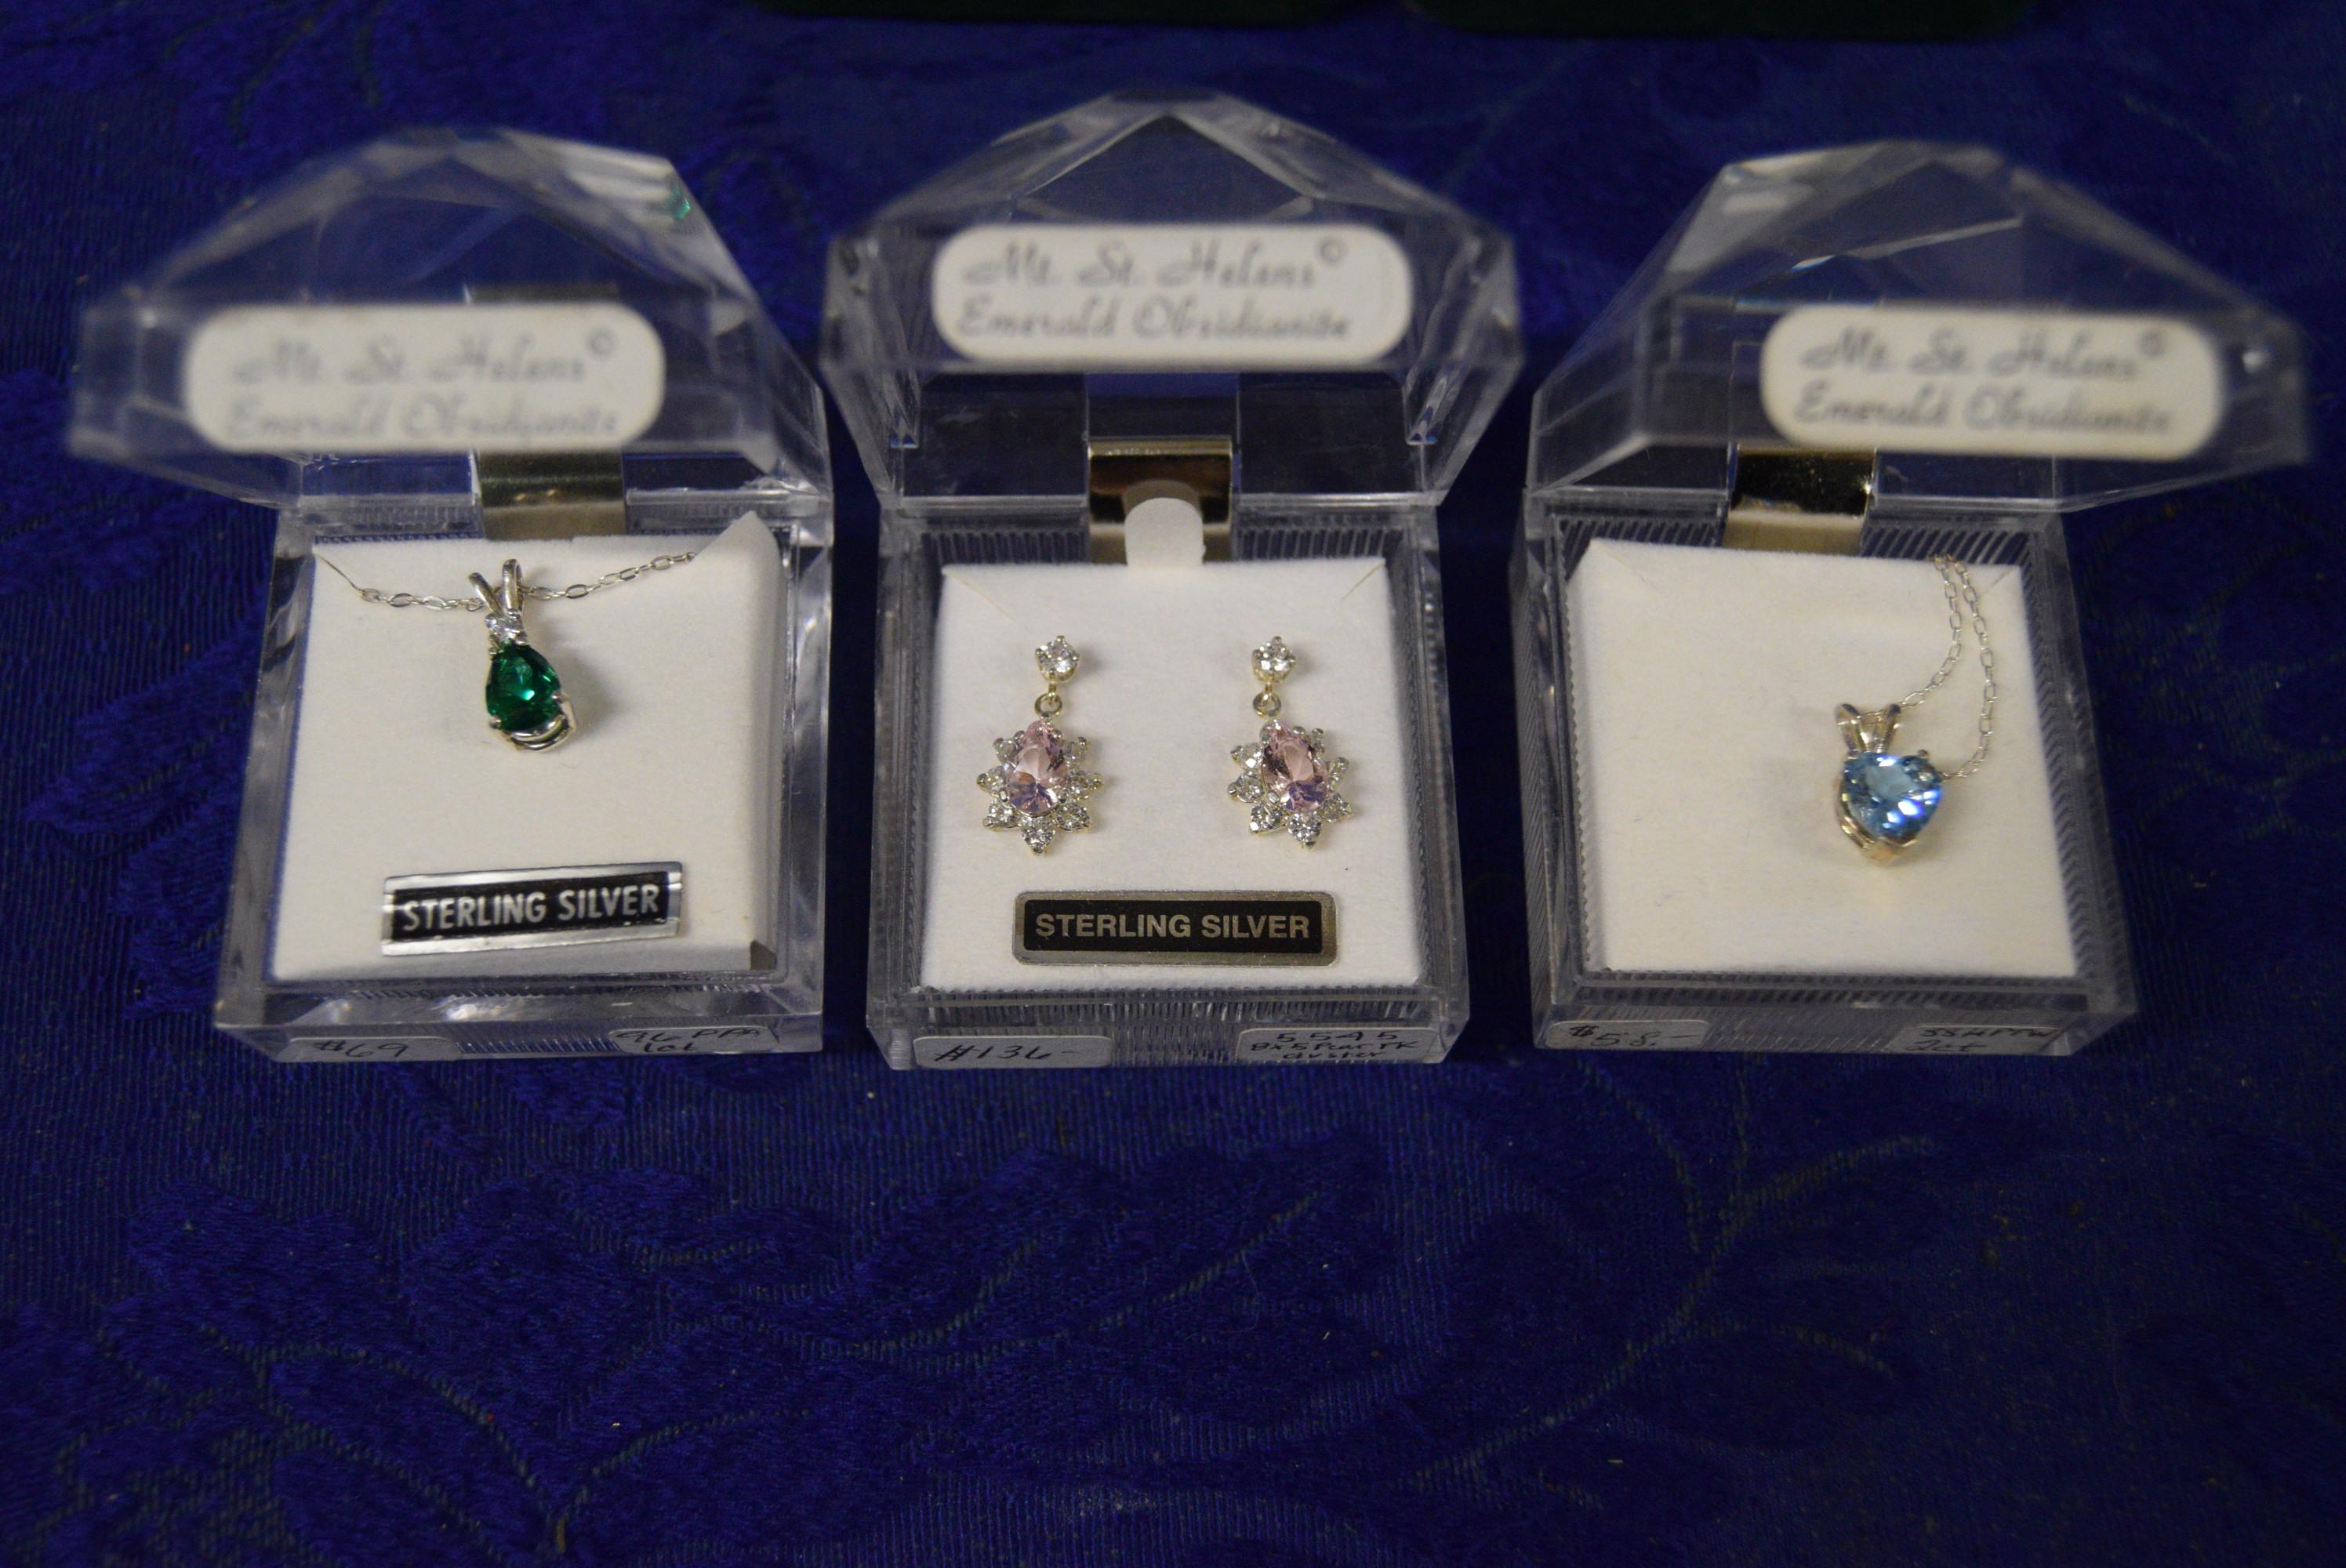 MT. ST HELENS STERLING JEWELRY!